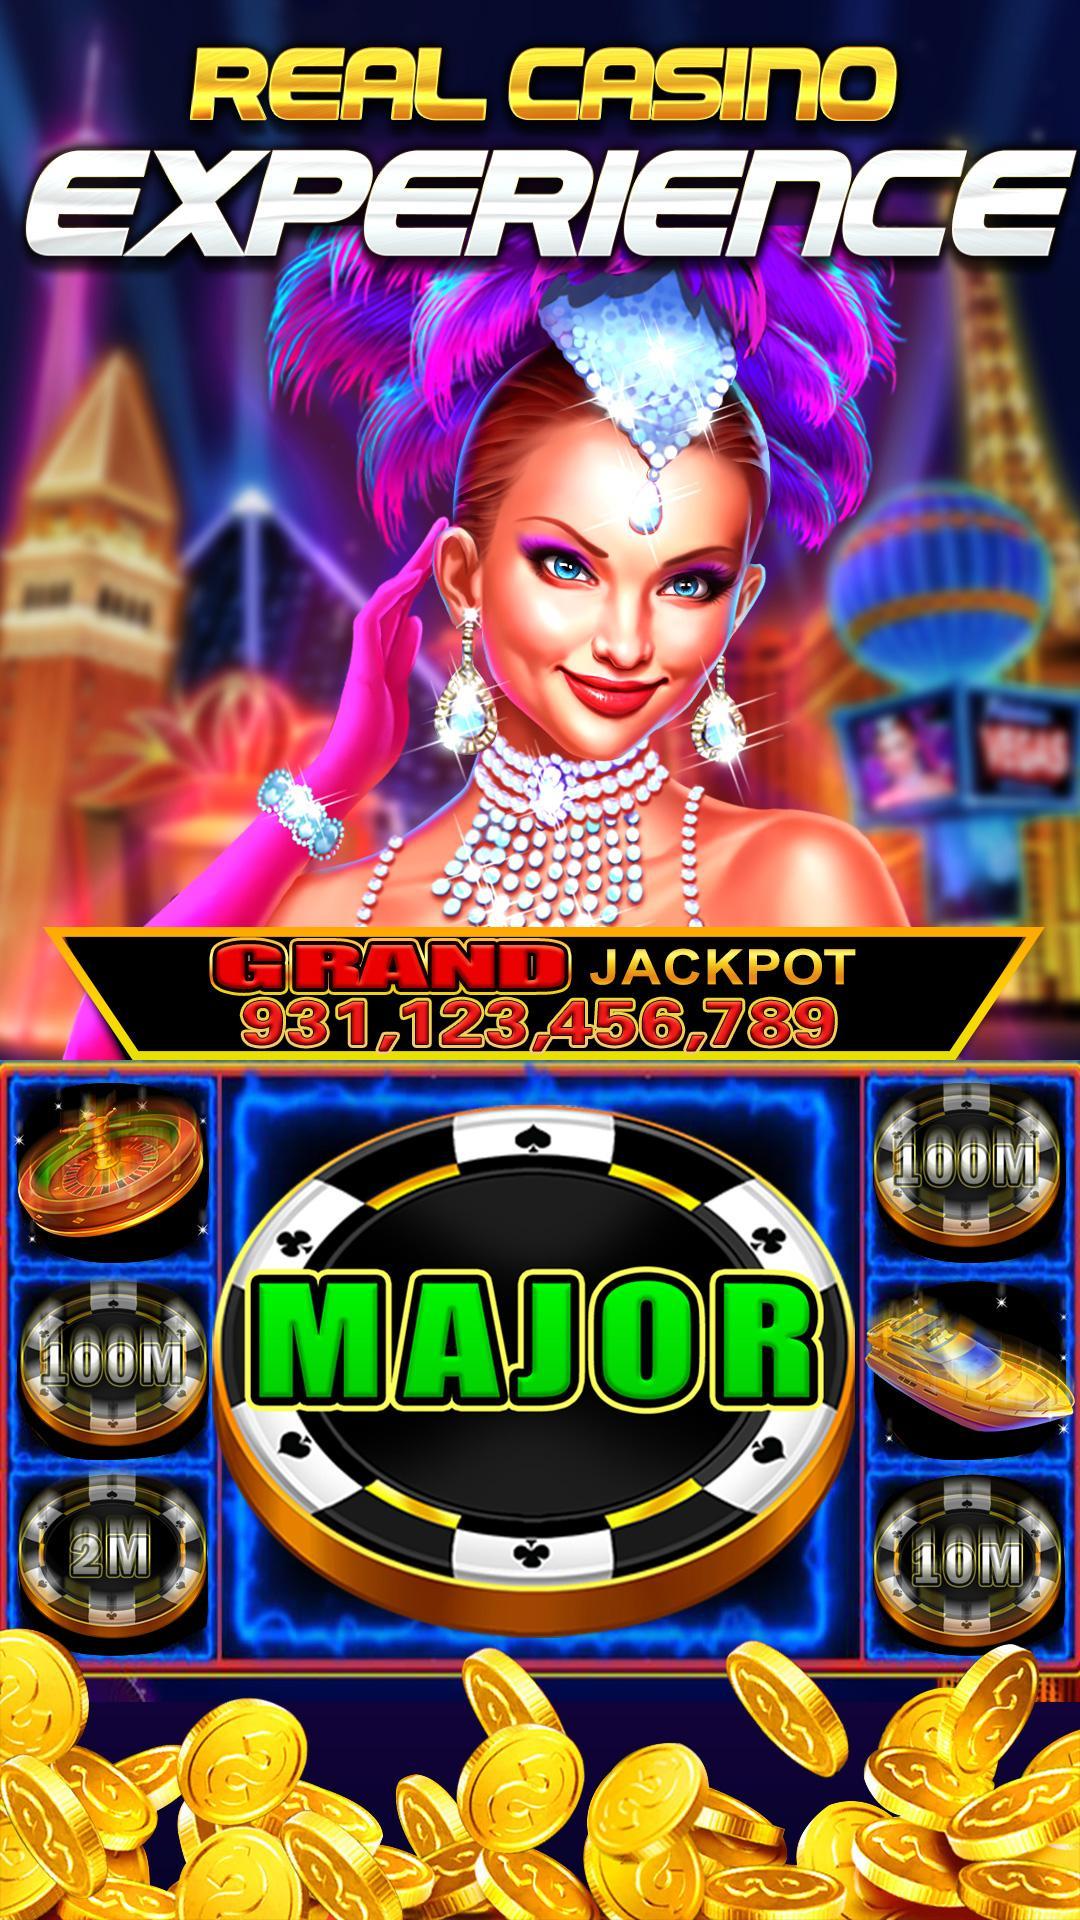 Epic Jackpot Slots Free Vegas Casino Games for Android